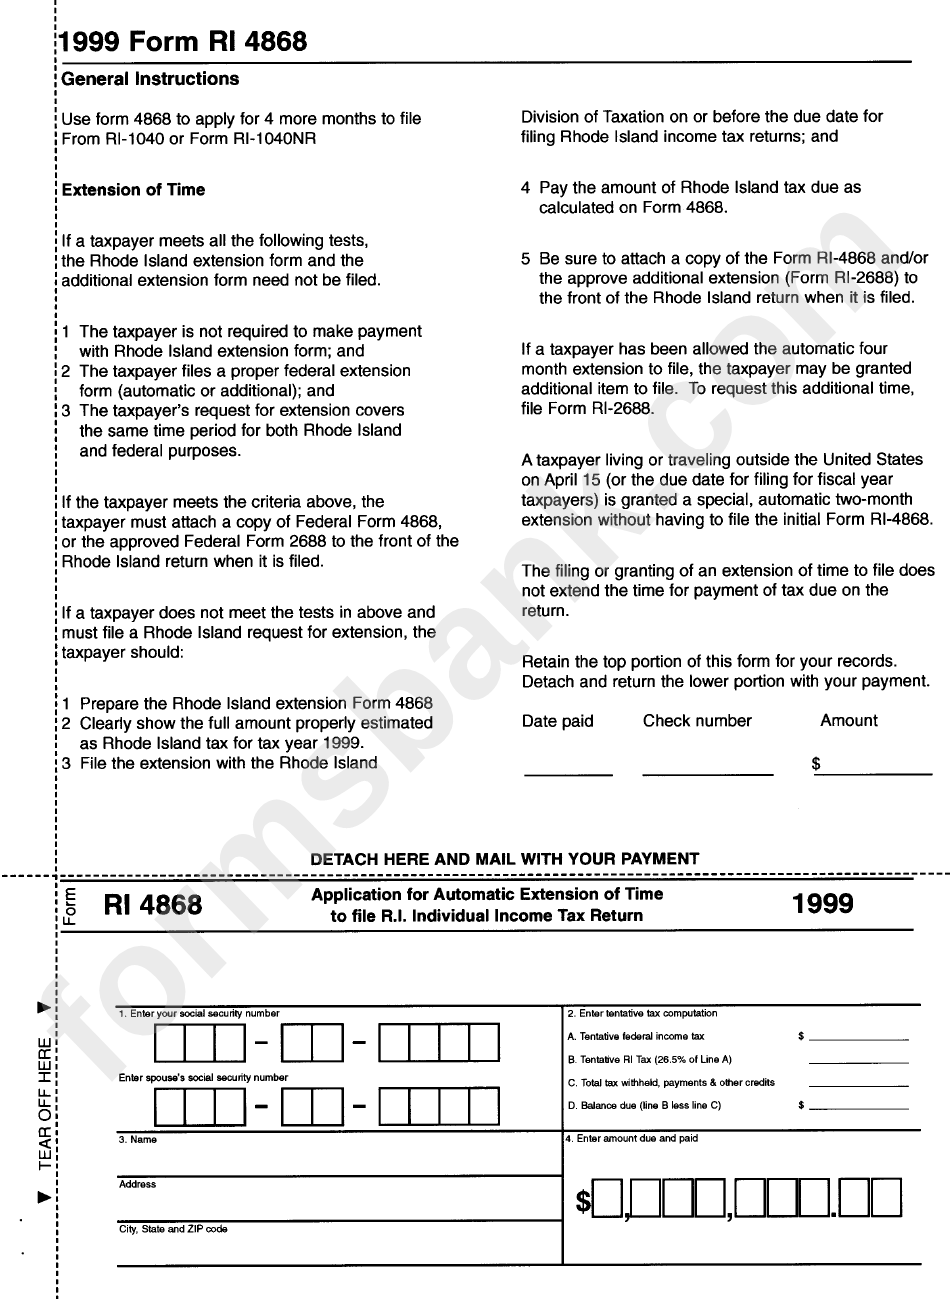 Form Ri-4868 Application For Automatic Extension Of Time To File R.i ...